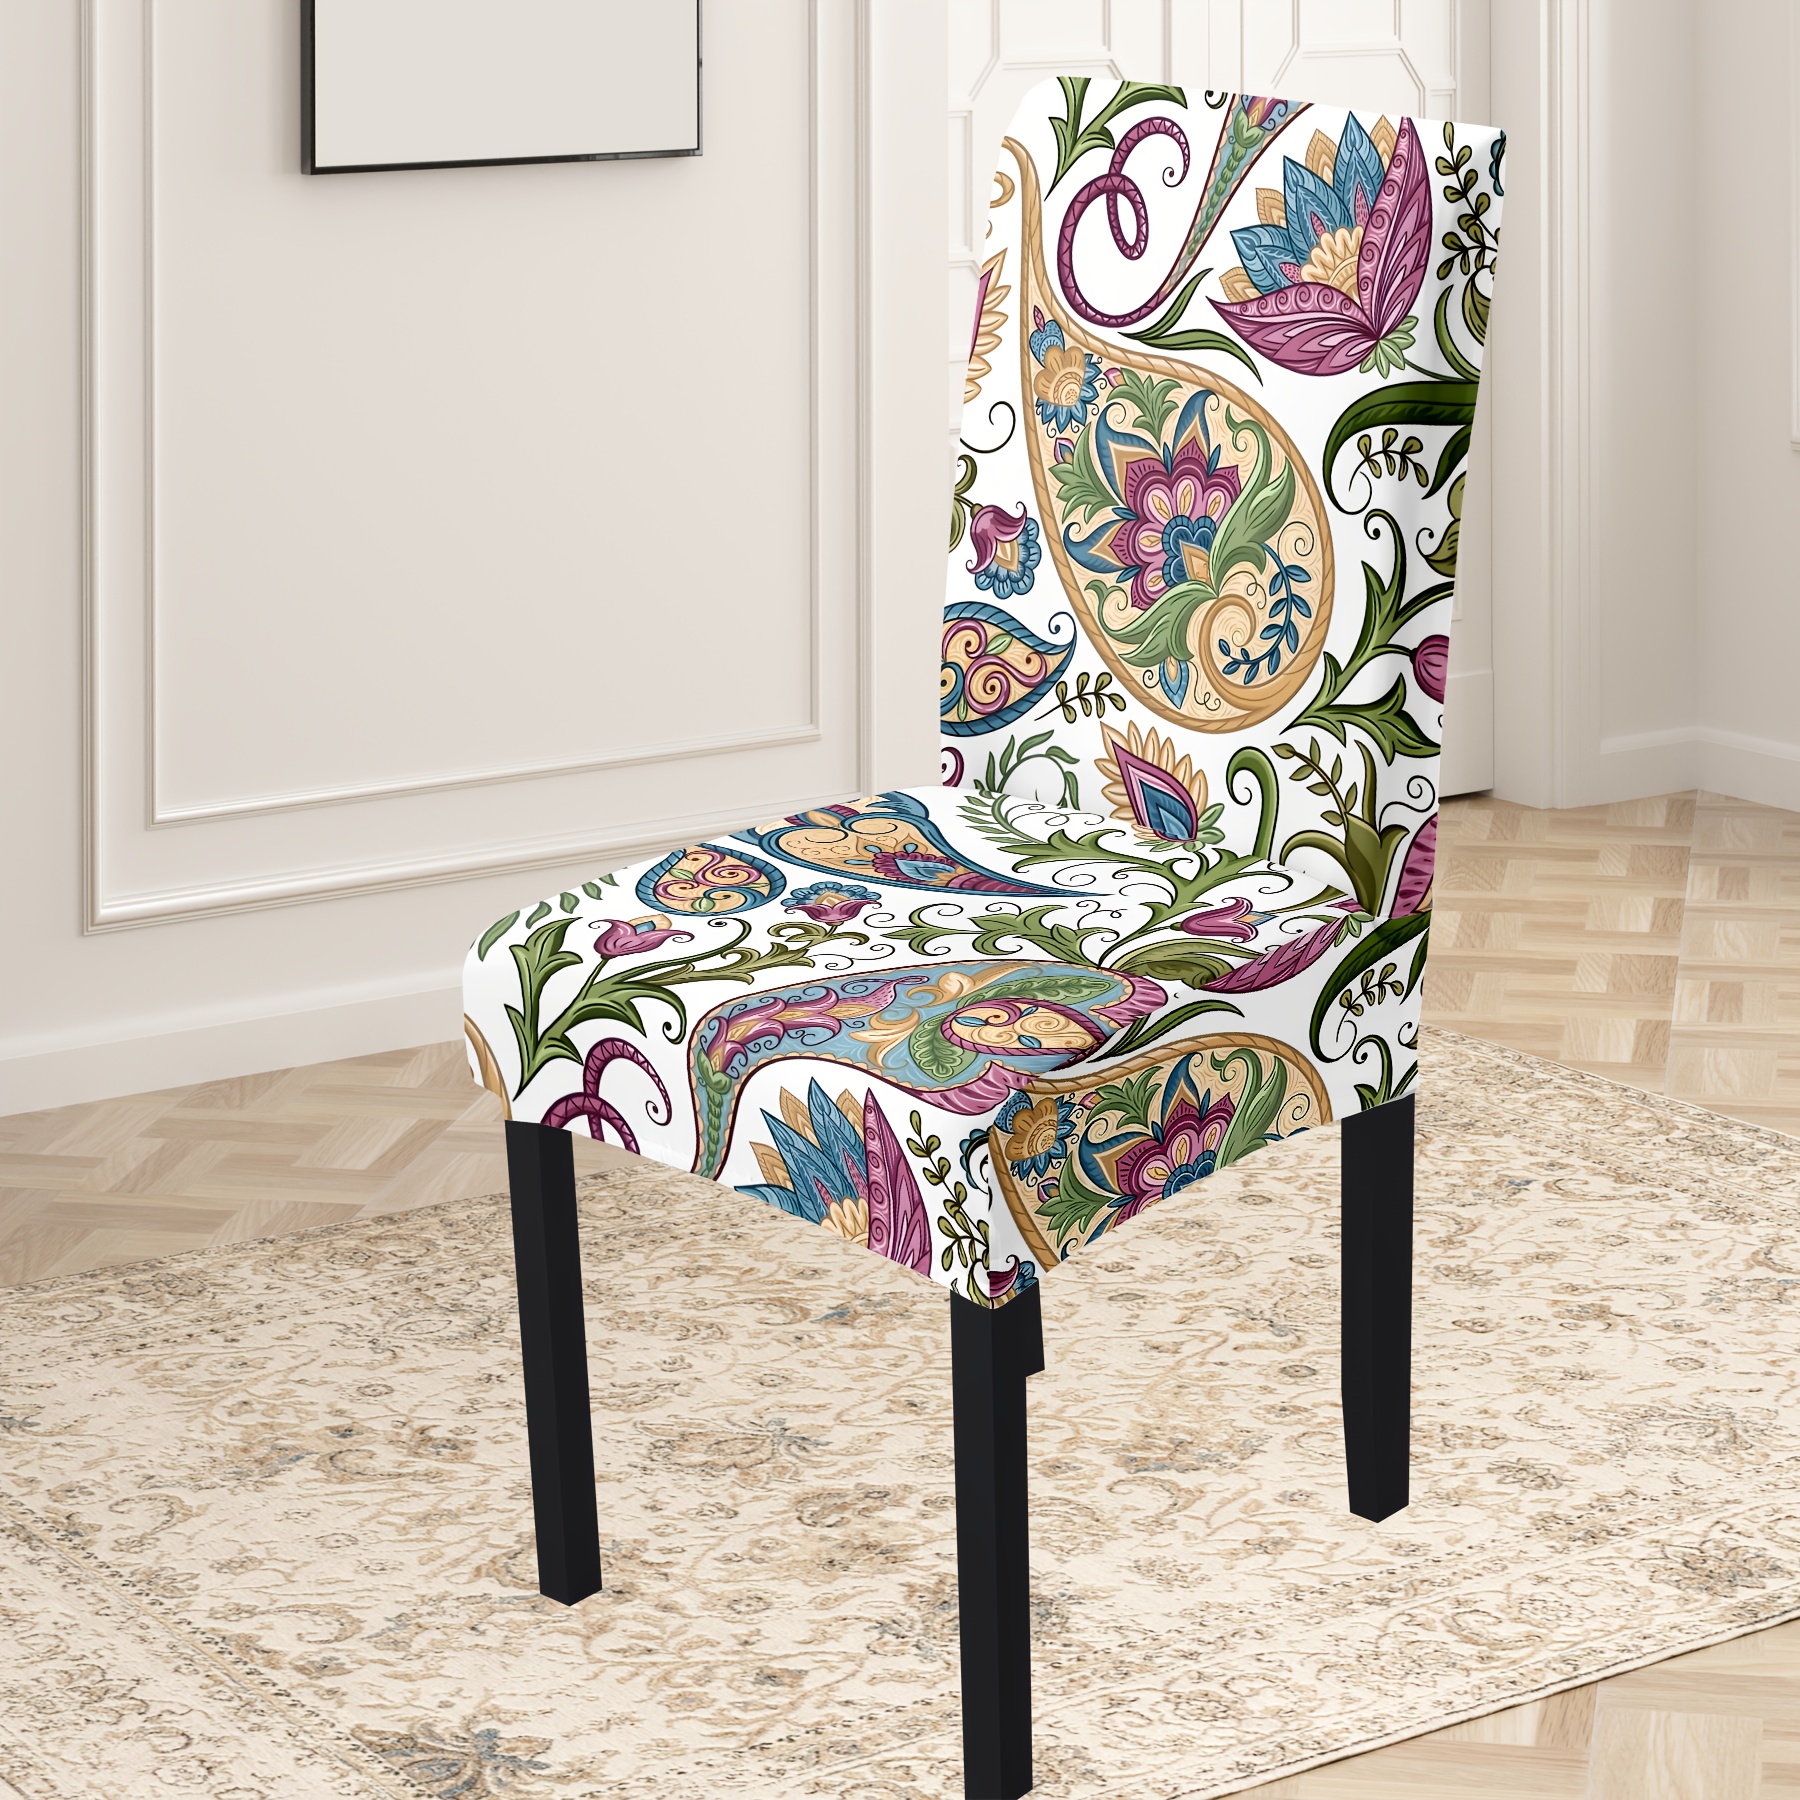 

Bohemian White Print Chair Slipcovers Set Of 4/6 - High Stretch Milk Silk Fabric, Machine Washable, Elastic Band, Non-fade, Dust-proof & Stain Resistant For Dining, Hotel, Garden Chair Decor